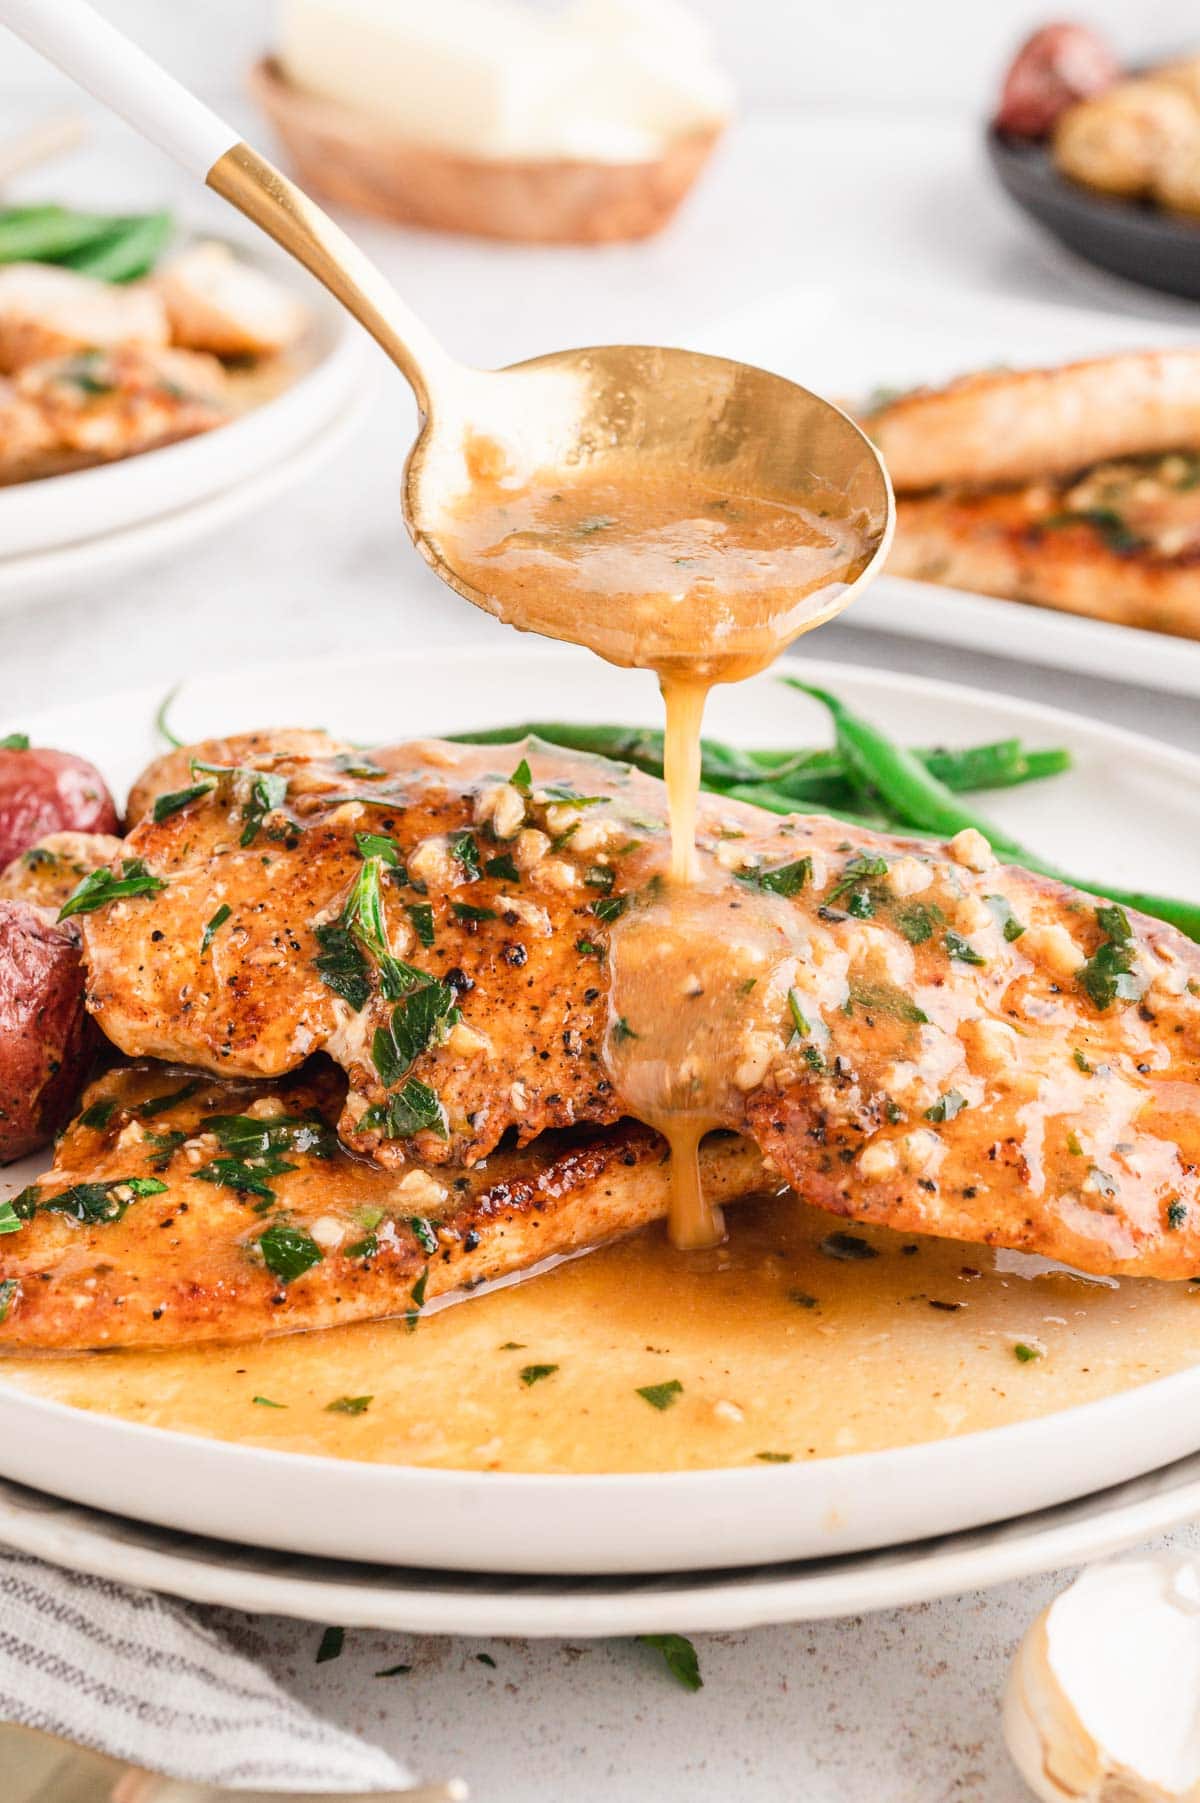 Garlic butter sauce spooned over a piece of chicken on a plate.